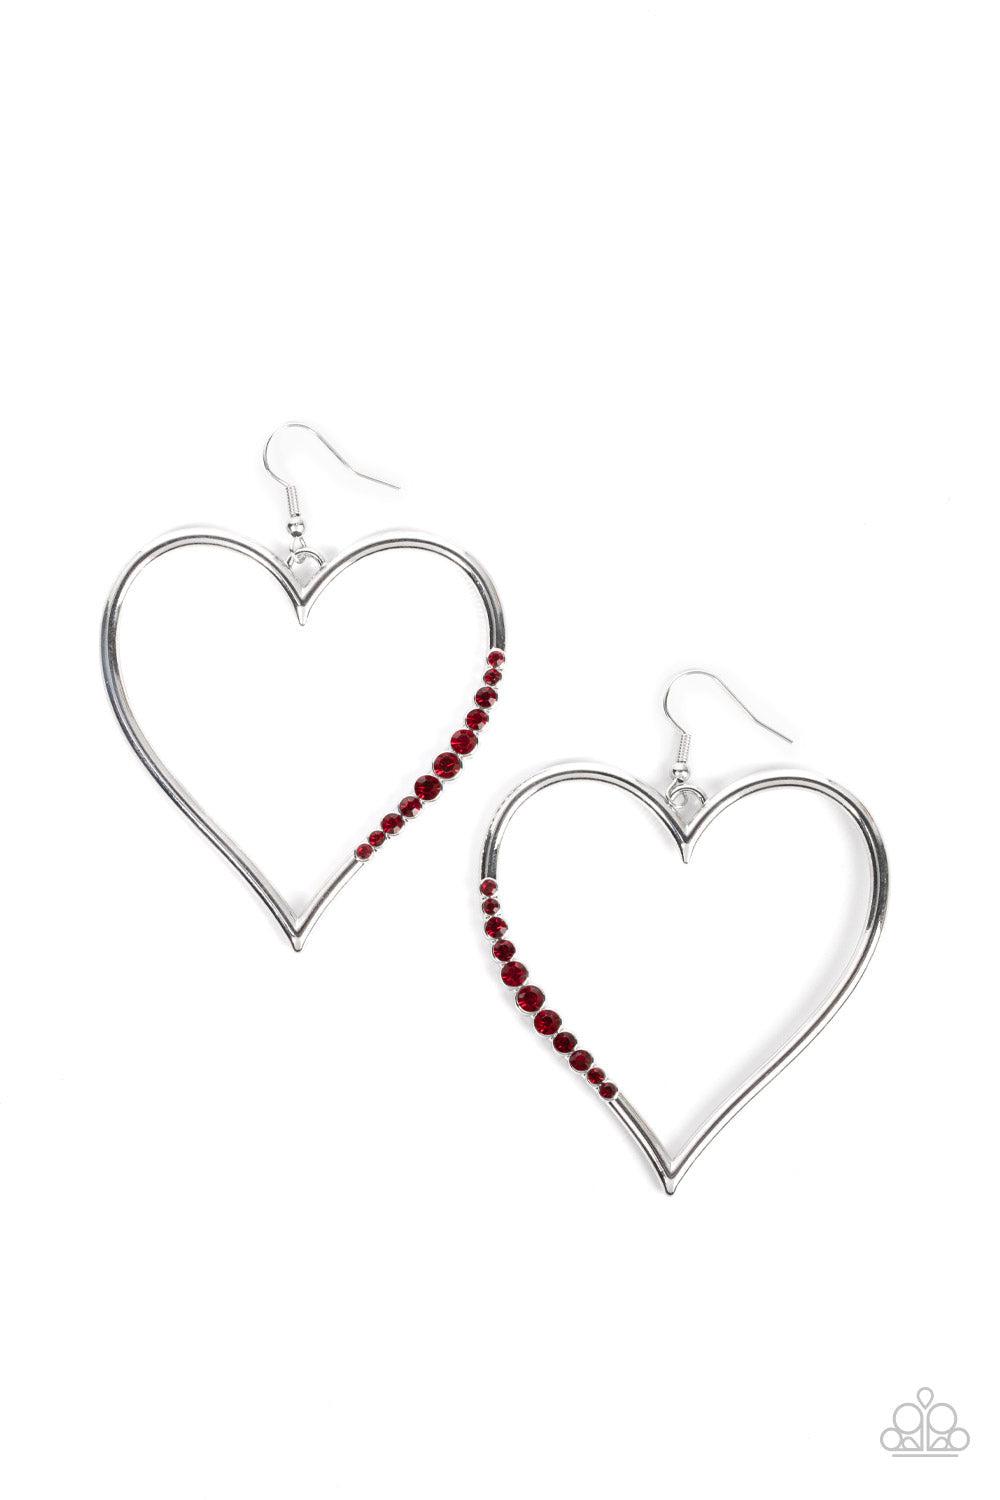 Bewitched Kiss Red Rhinestone Heart Earrings - Paparazzi Accessories- lightbox - CarasShop.com - $5 Jewelry by Cara Jewels